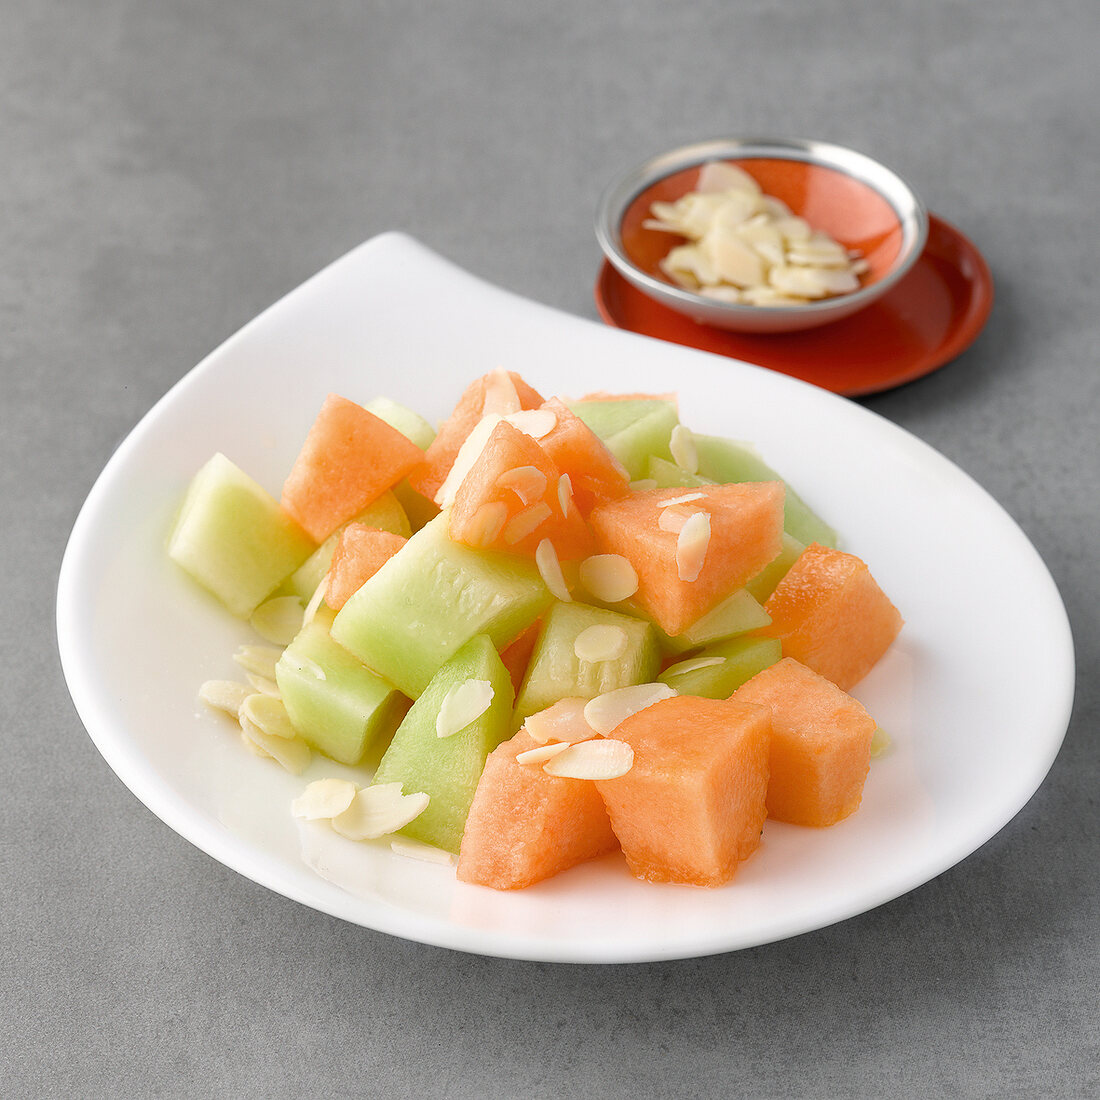 Melon salad with flaked almonds on plate